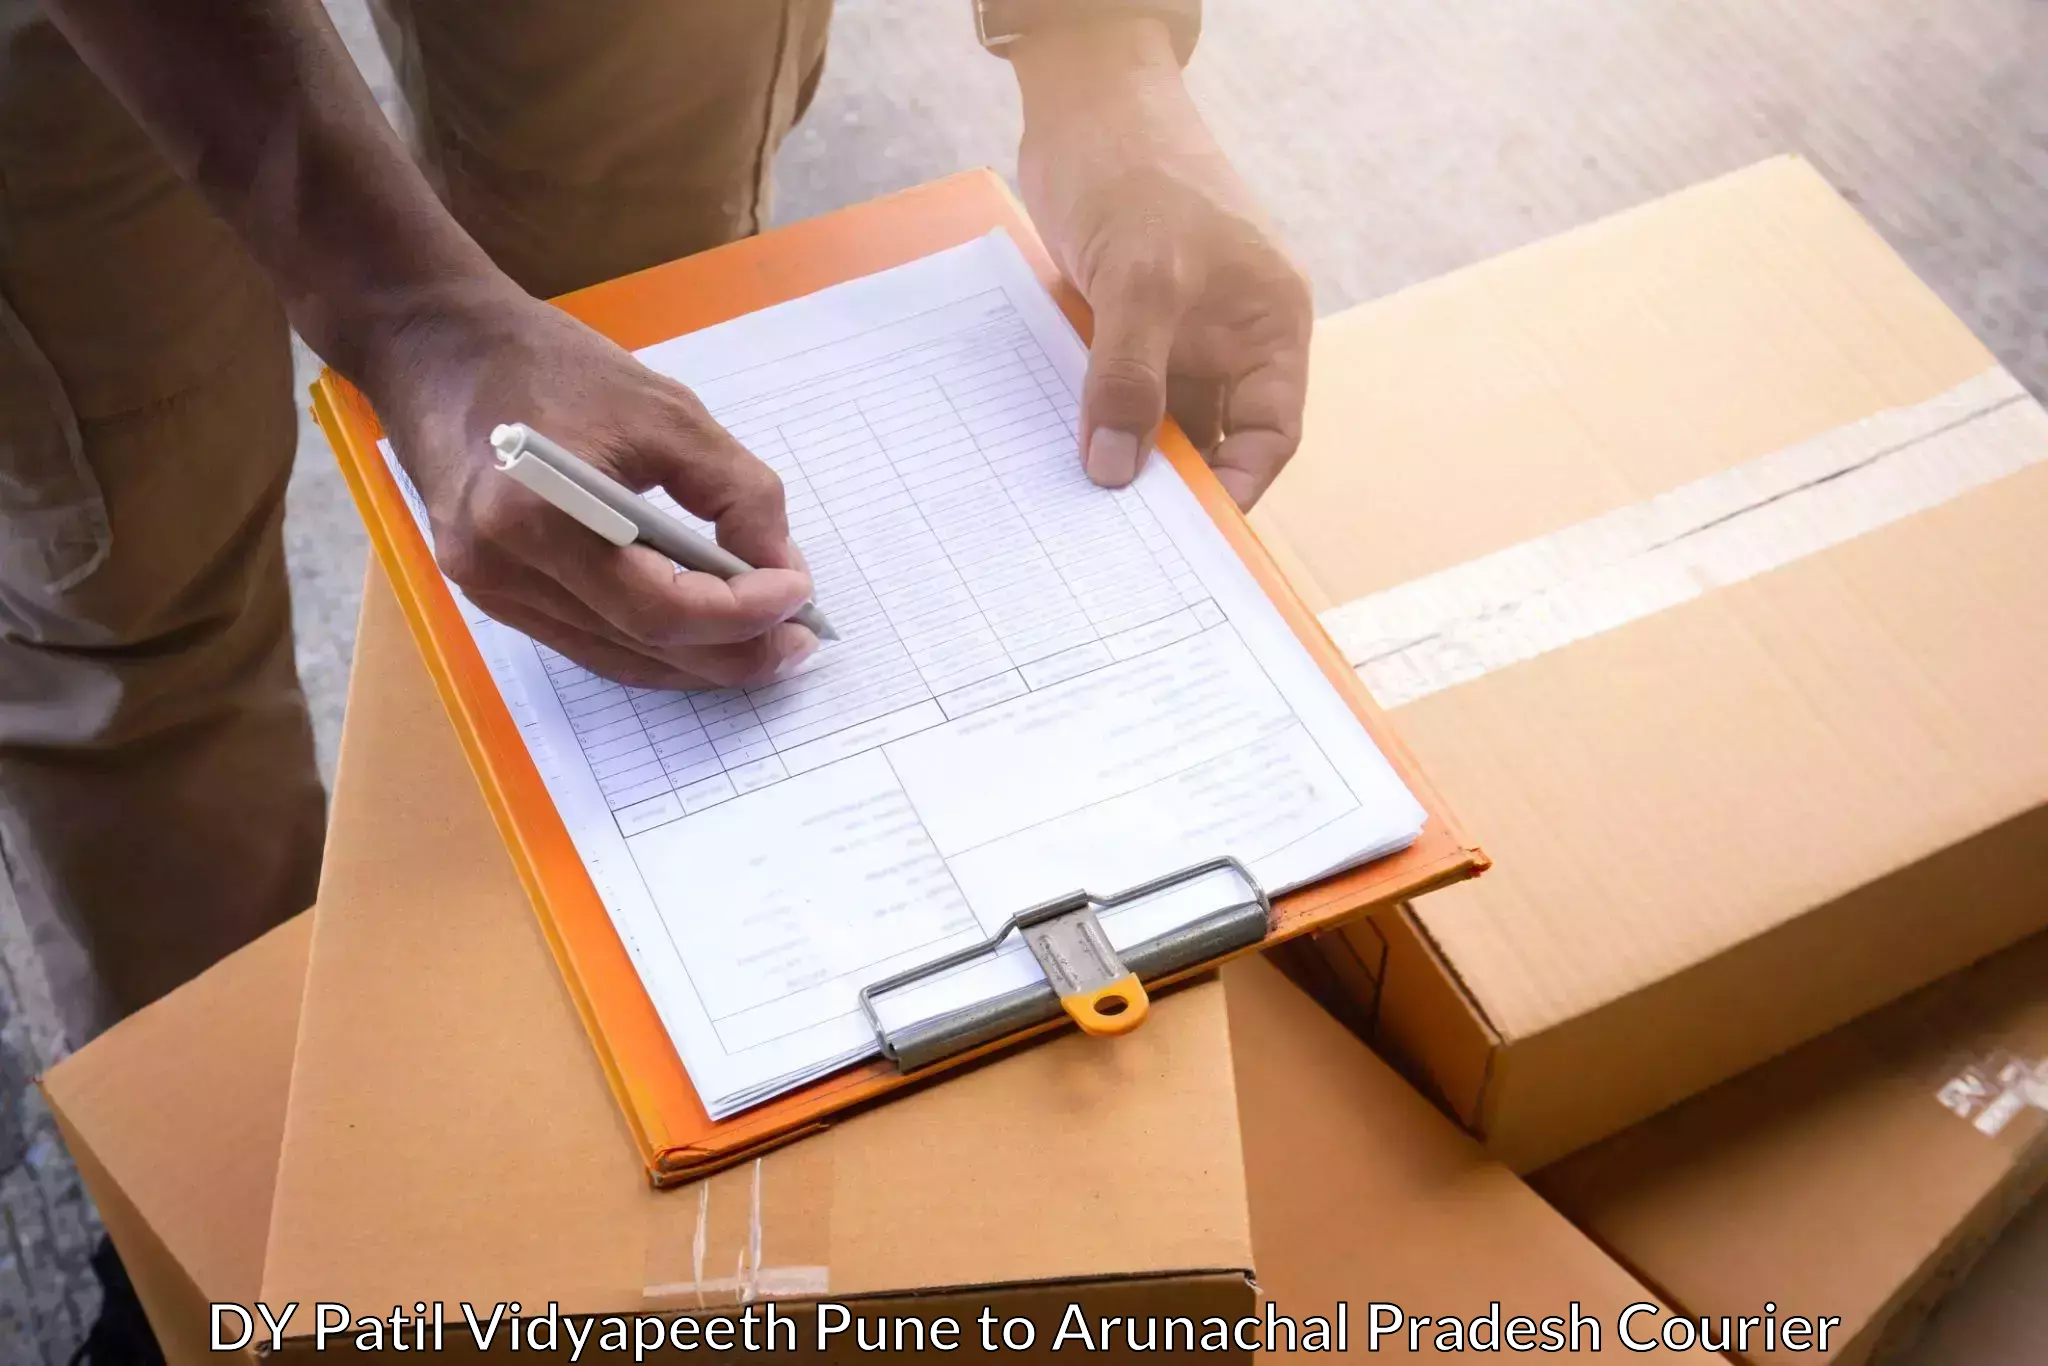 On-call courier service DY Patil Vidyapeeth Pune to Lower Subansiri